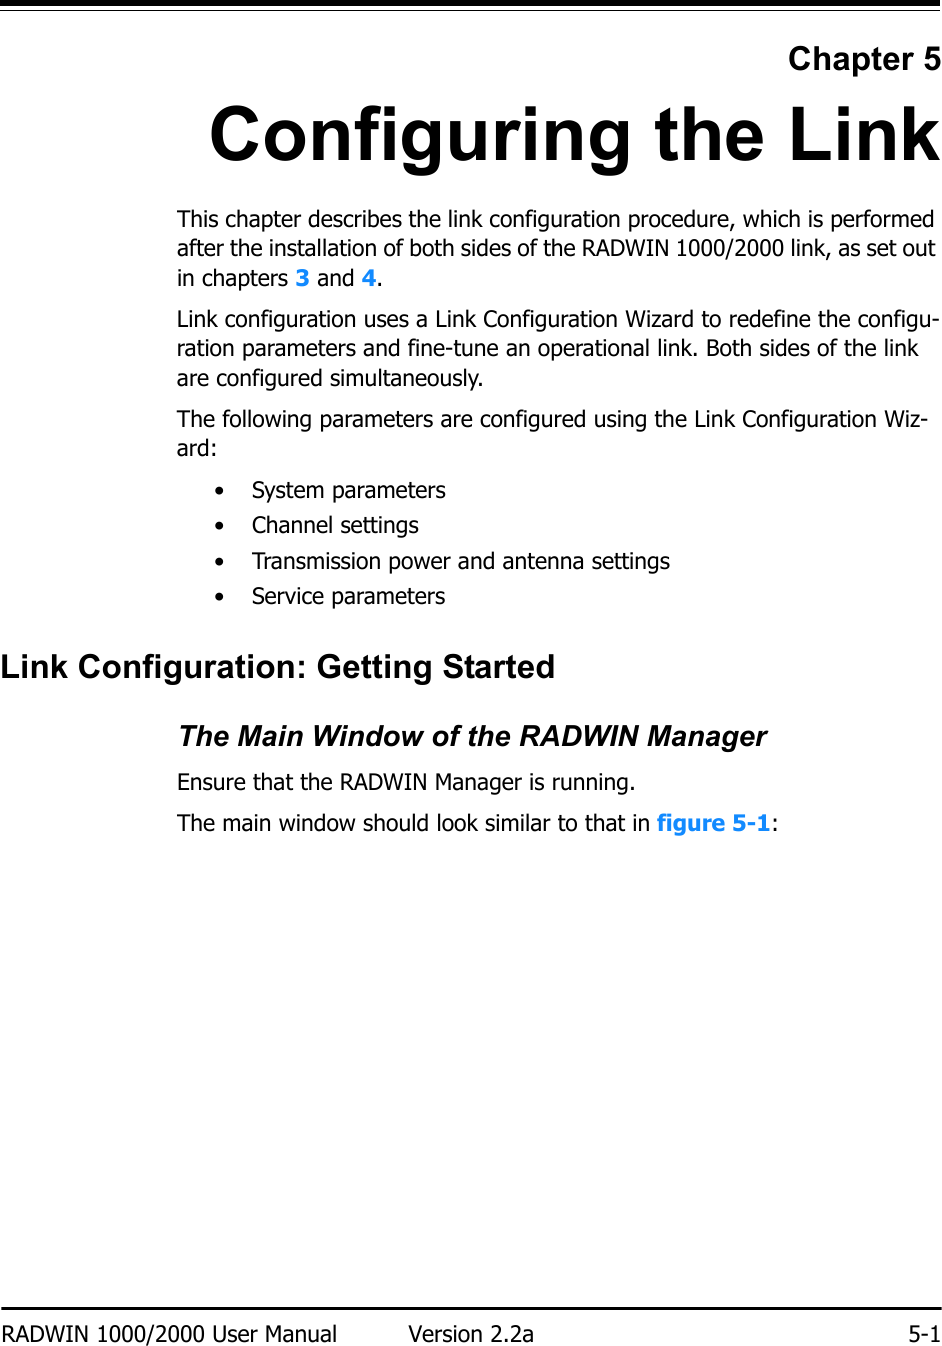 RADWIN 1000/2000 User Manual Version 2.2a 5-1Chapter 5Configuring the LinkThis chapter describes the link configuration procedure, which is performed after the installation of both sides of the RADWIN 1000/2000 link, as set out in chapters 3 and 4.Link configuration uses a Link Configuration Wizard to redefine the configu-ration parameters and fine-tune an operational link. Both sides of the link are configured simultaneously.The following parameters are configured using the Link Configuration Wiz-ard:• System parameters• Channel settings• Transmission power and antenna settings•Service parametersLink Configuration: Getting StartedThe Main Window of the RADWIN ManagerEnsure that the RADWIN Manager is running.The main window should look similar to that in figure 5-1: